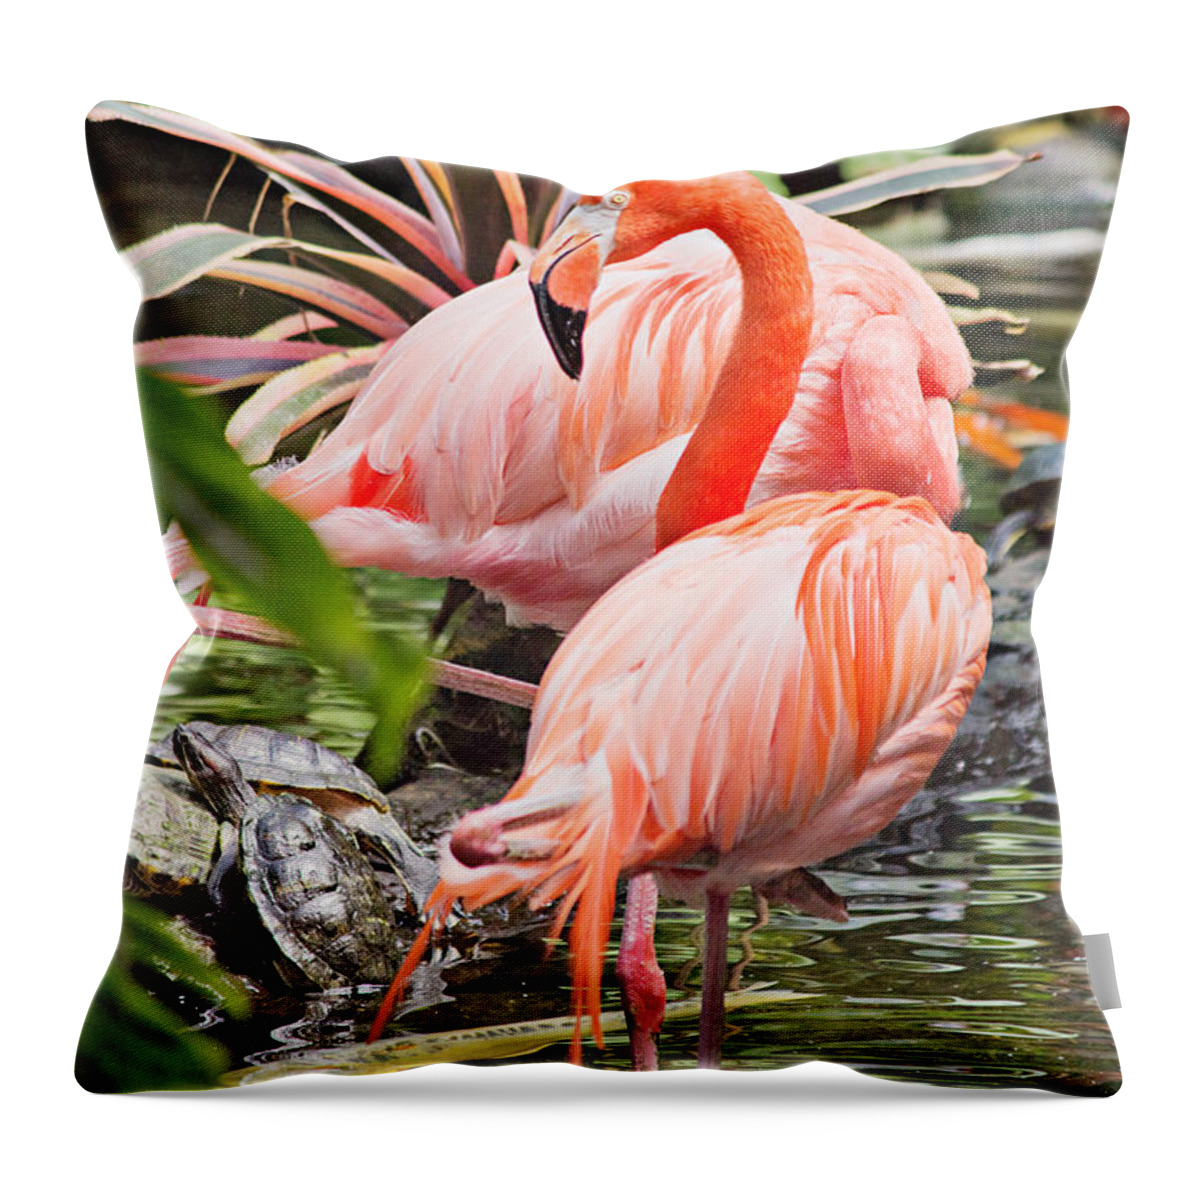 Flamingo Throw Pillow featuring the photograph Butterfly Garden Wildlife by Peter J Sucy